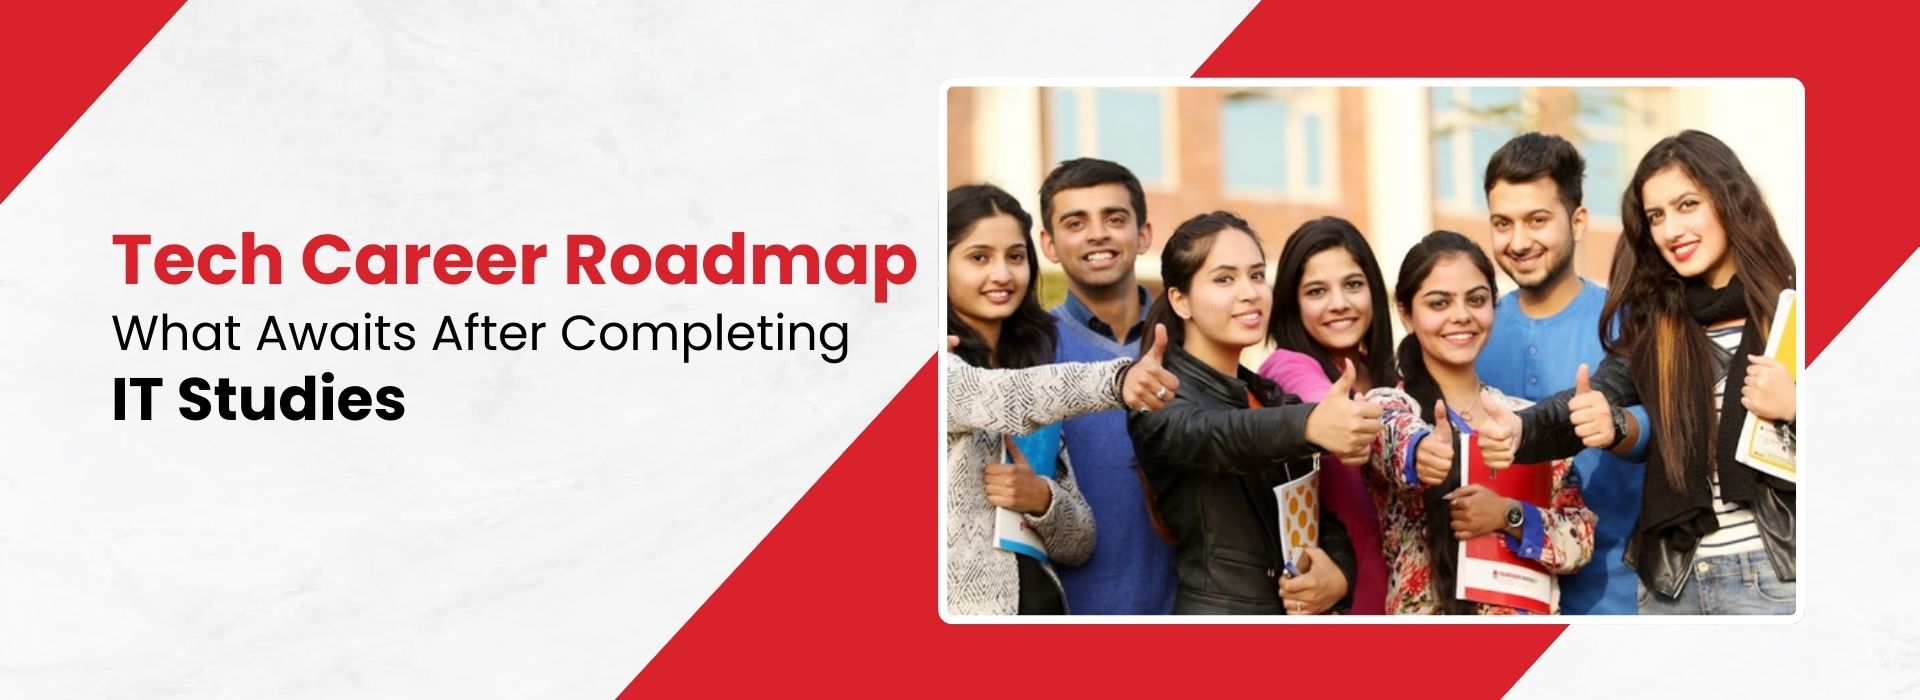 Tech Career Roadmap: What Awaits After Completing IT Studies